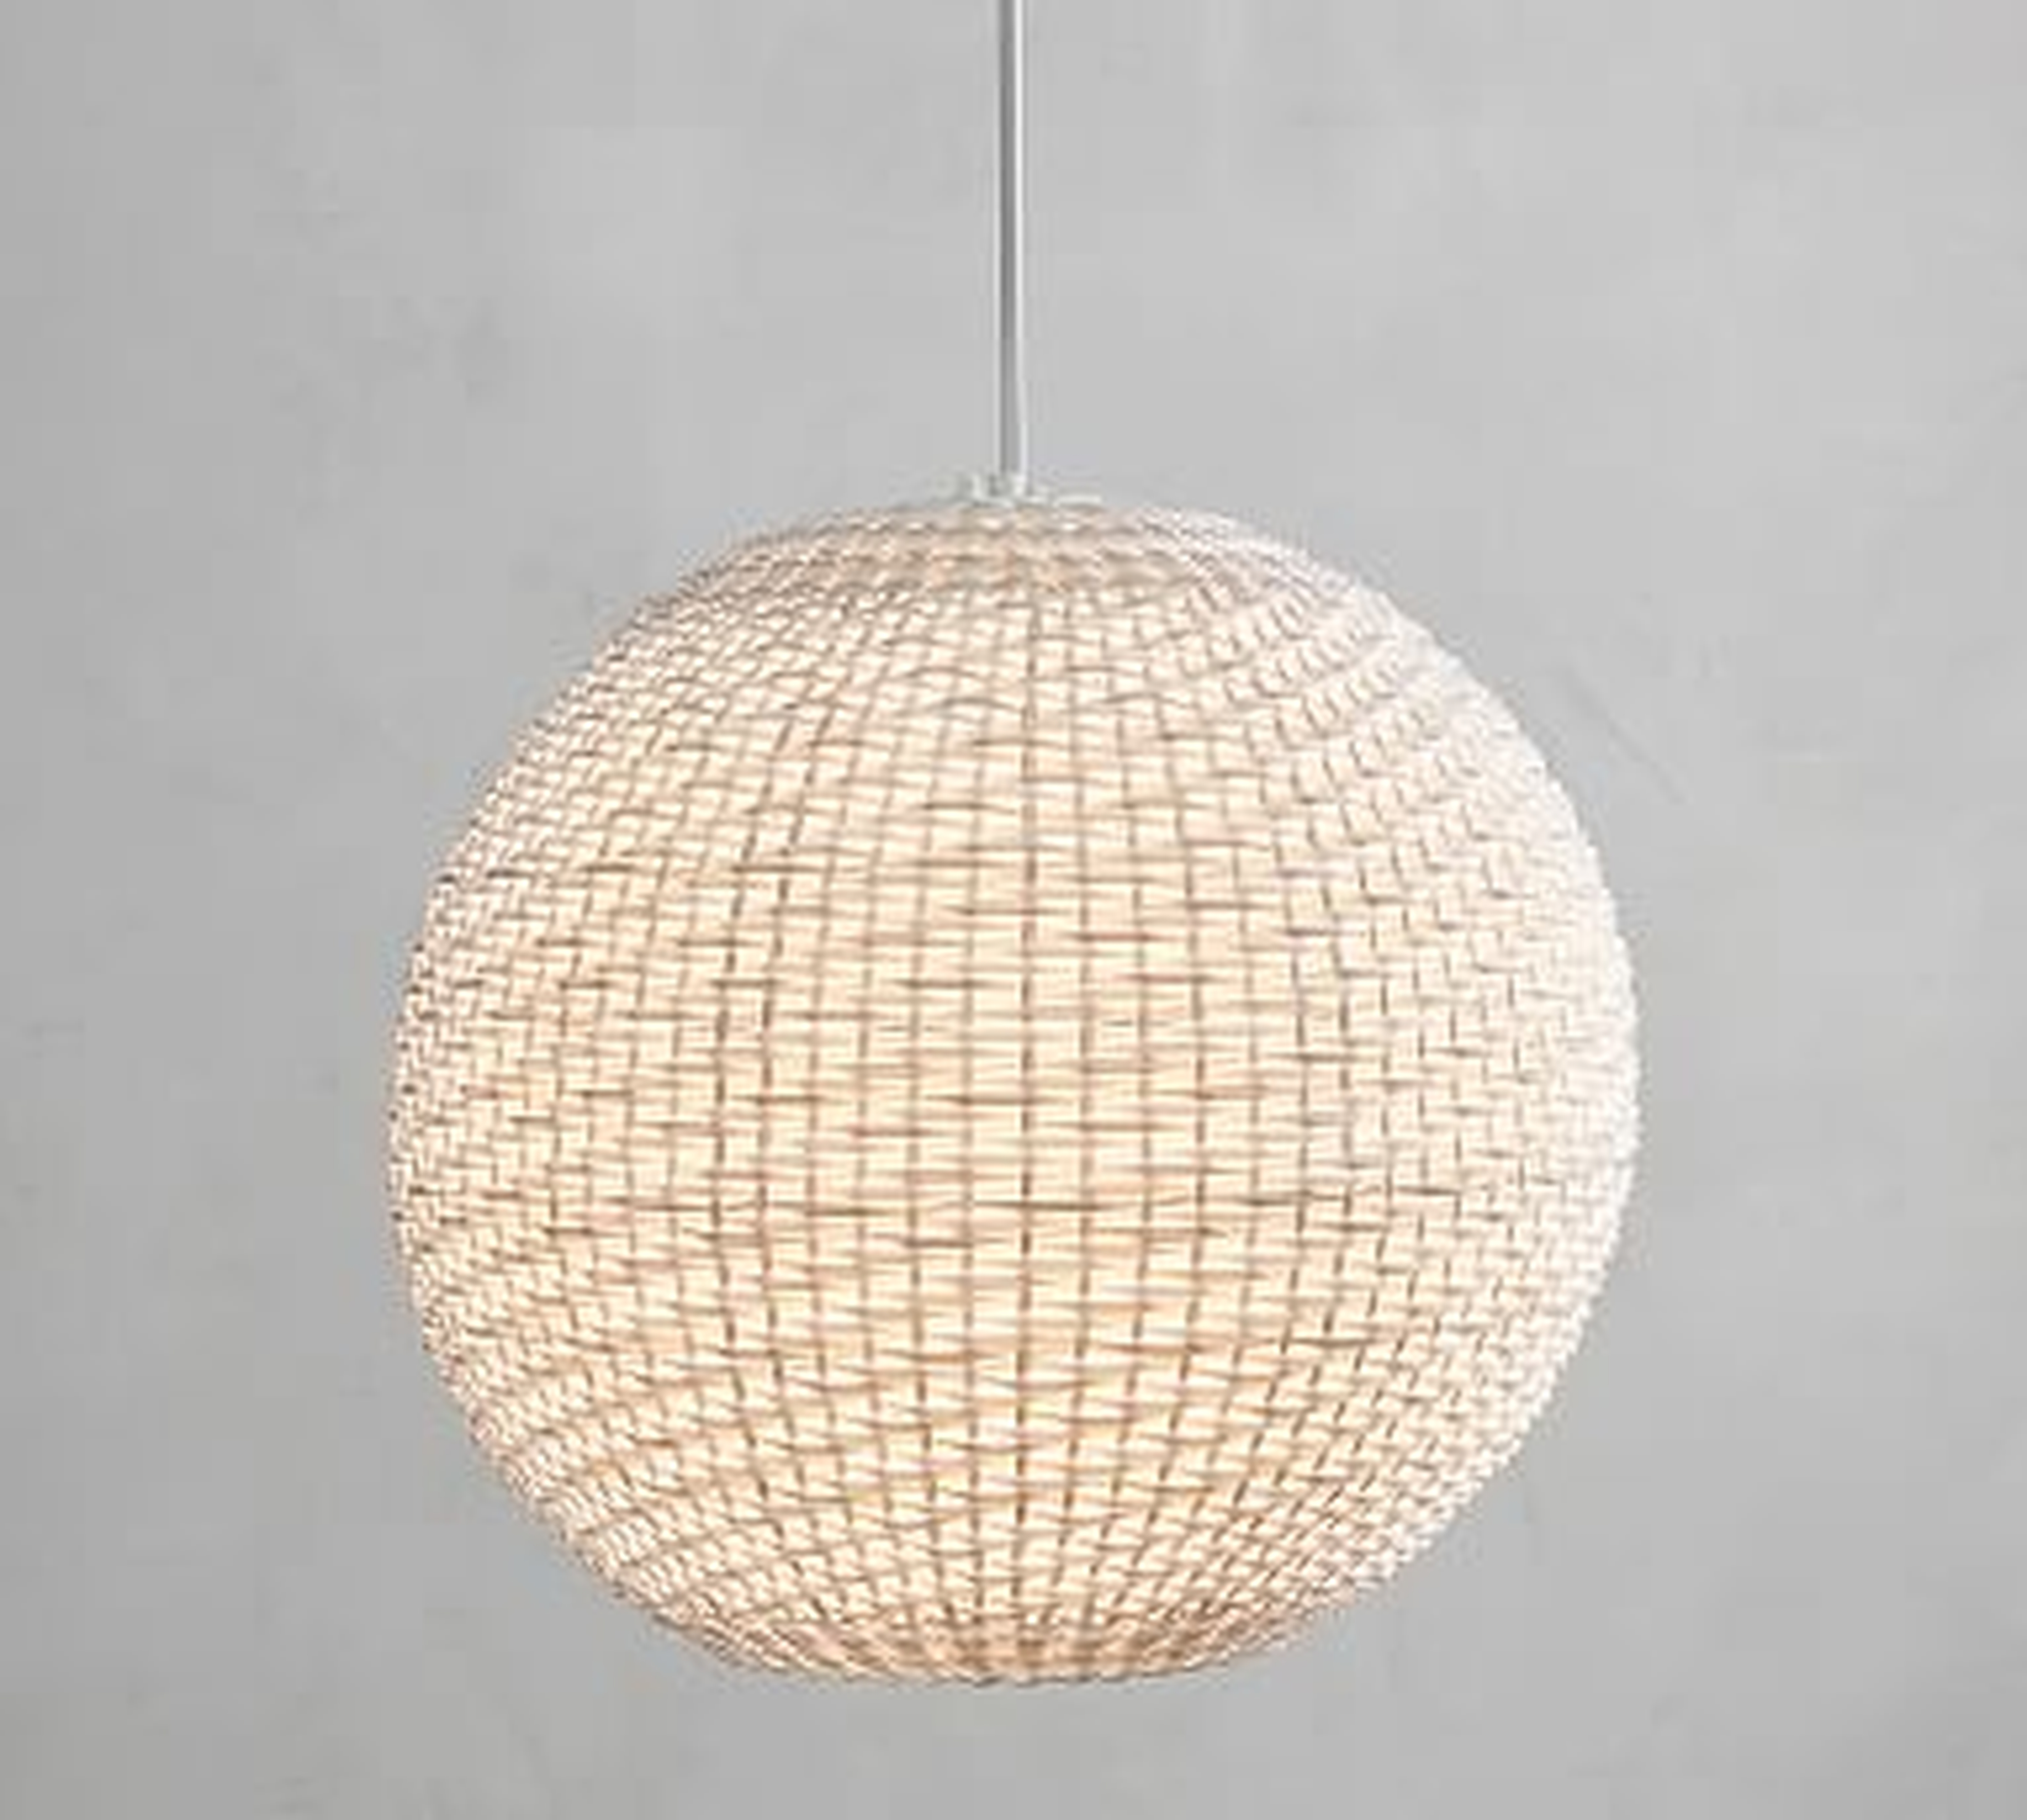 Torrey All-Weather Wicker Indoor/Outdoor Pendant, White, Large - Pottery Barn